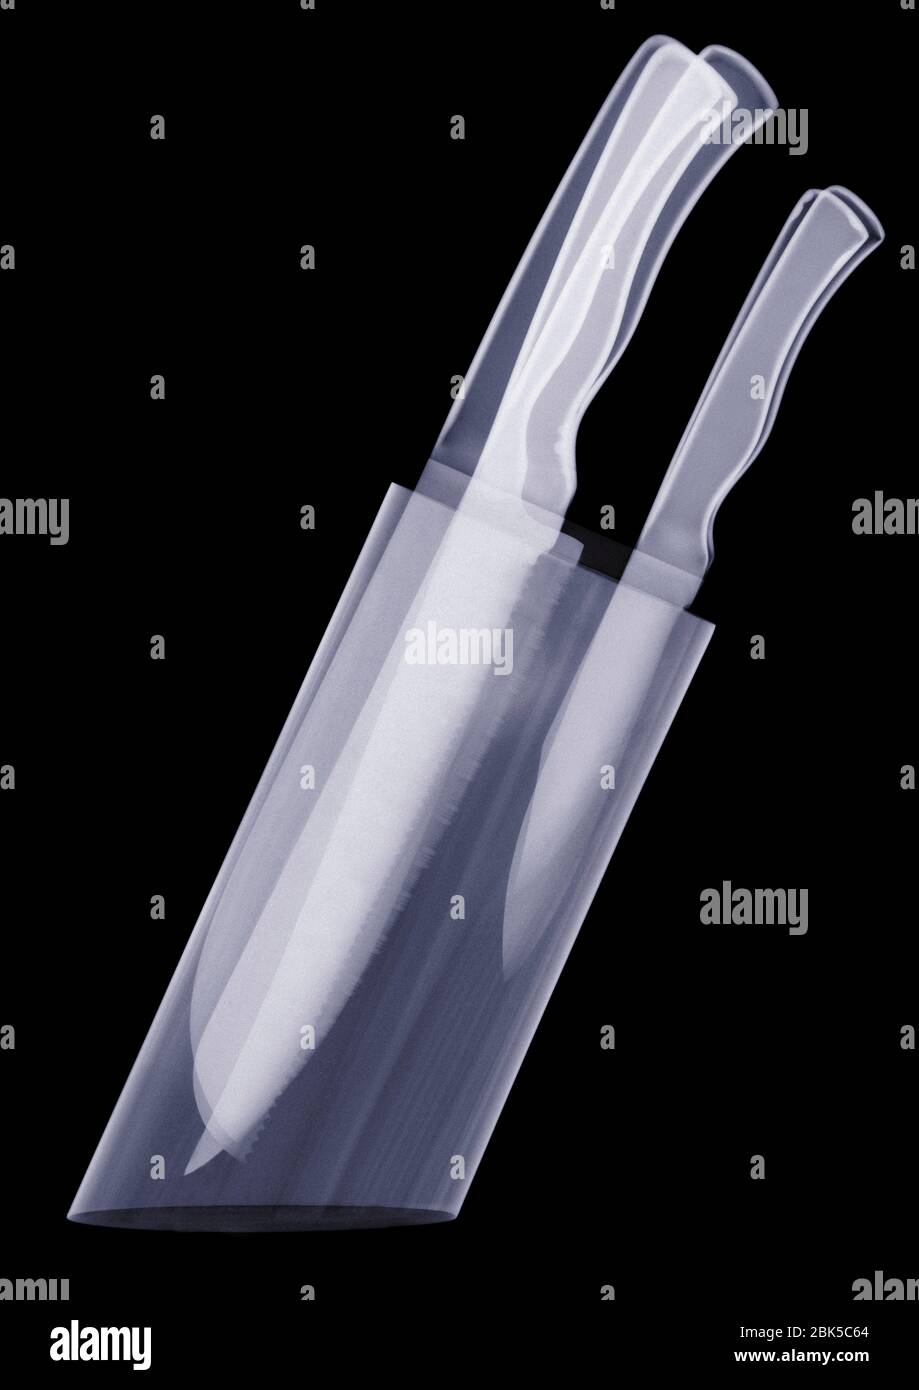 Knives in a knife block, X-ray. Stock Photo